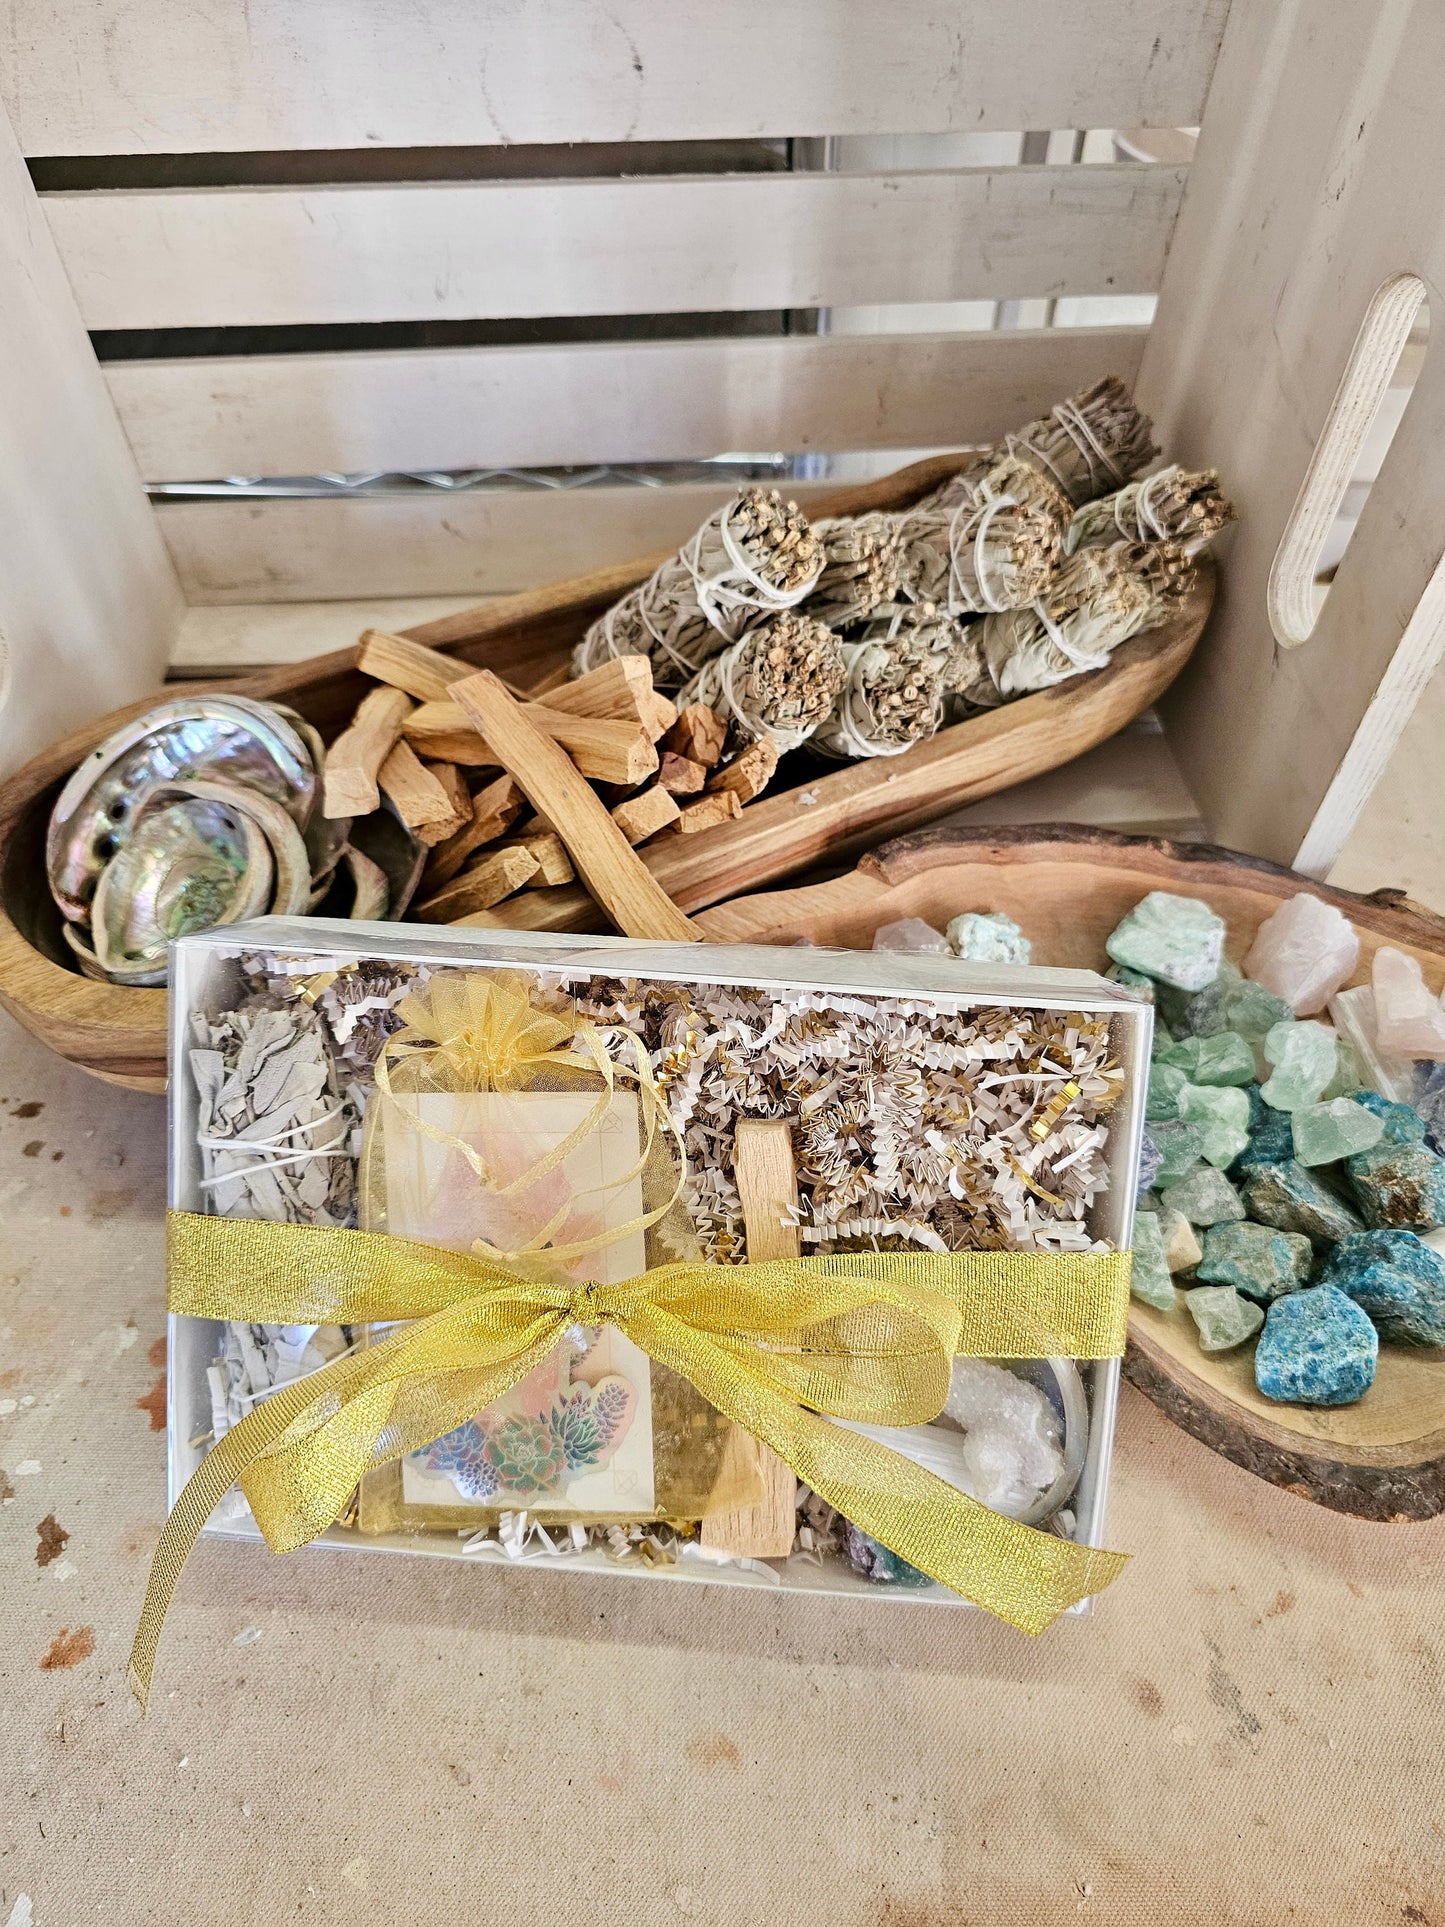 Customizable Healing Smudge Kit Gift Box for Holiday Present with Sage, Palo Santo, Abalone Shell, Selenite, and Crystals